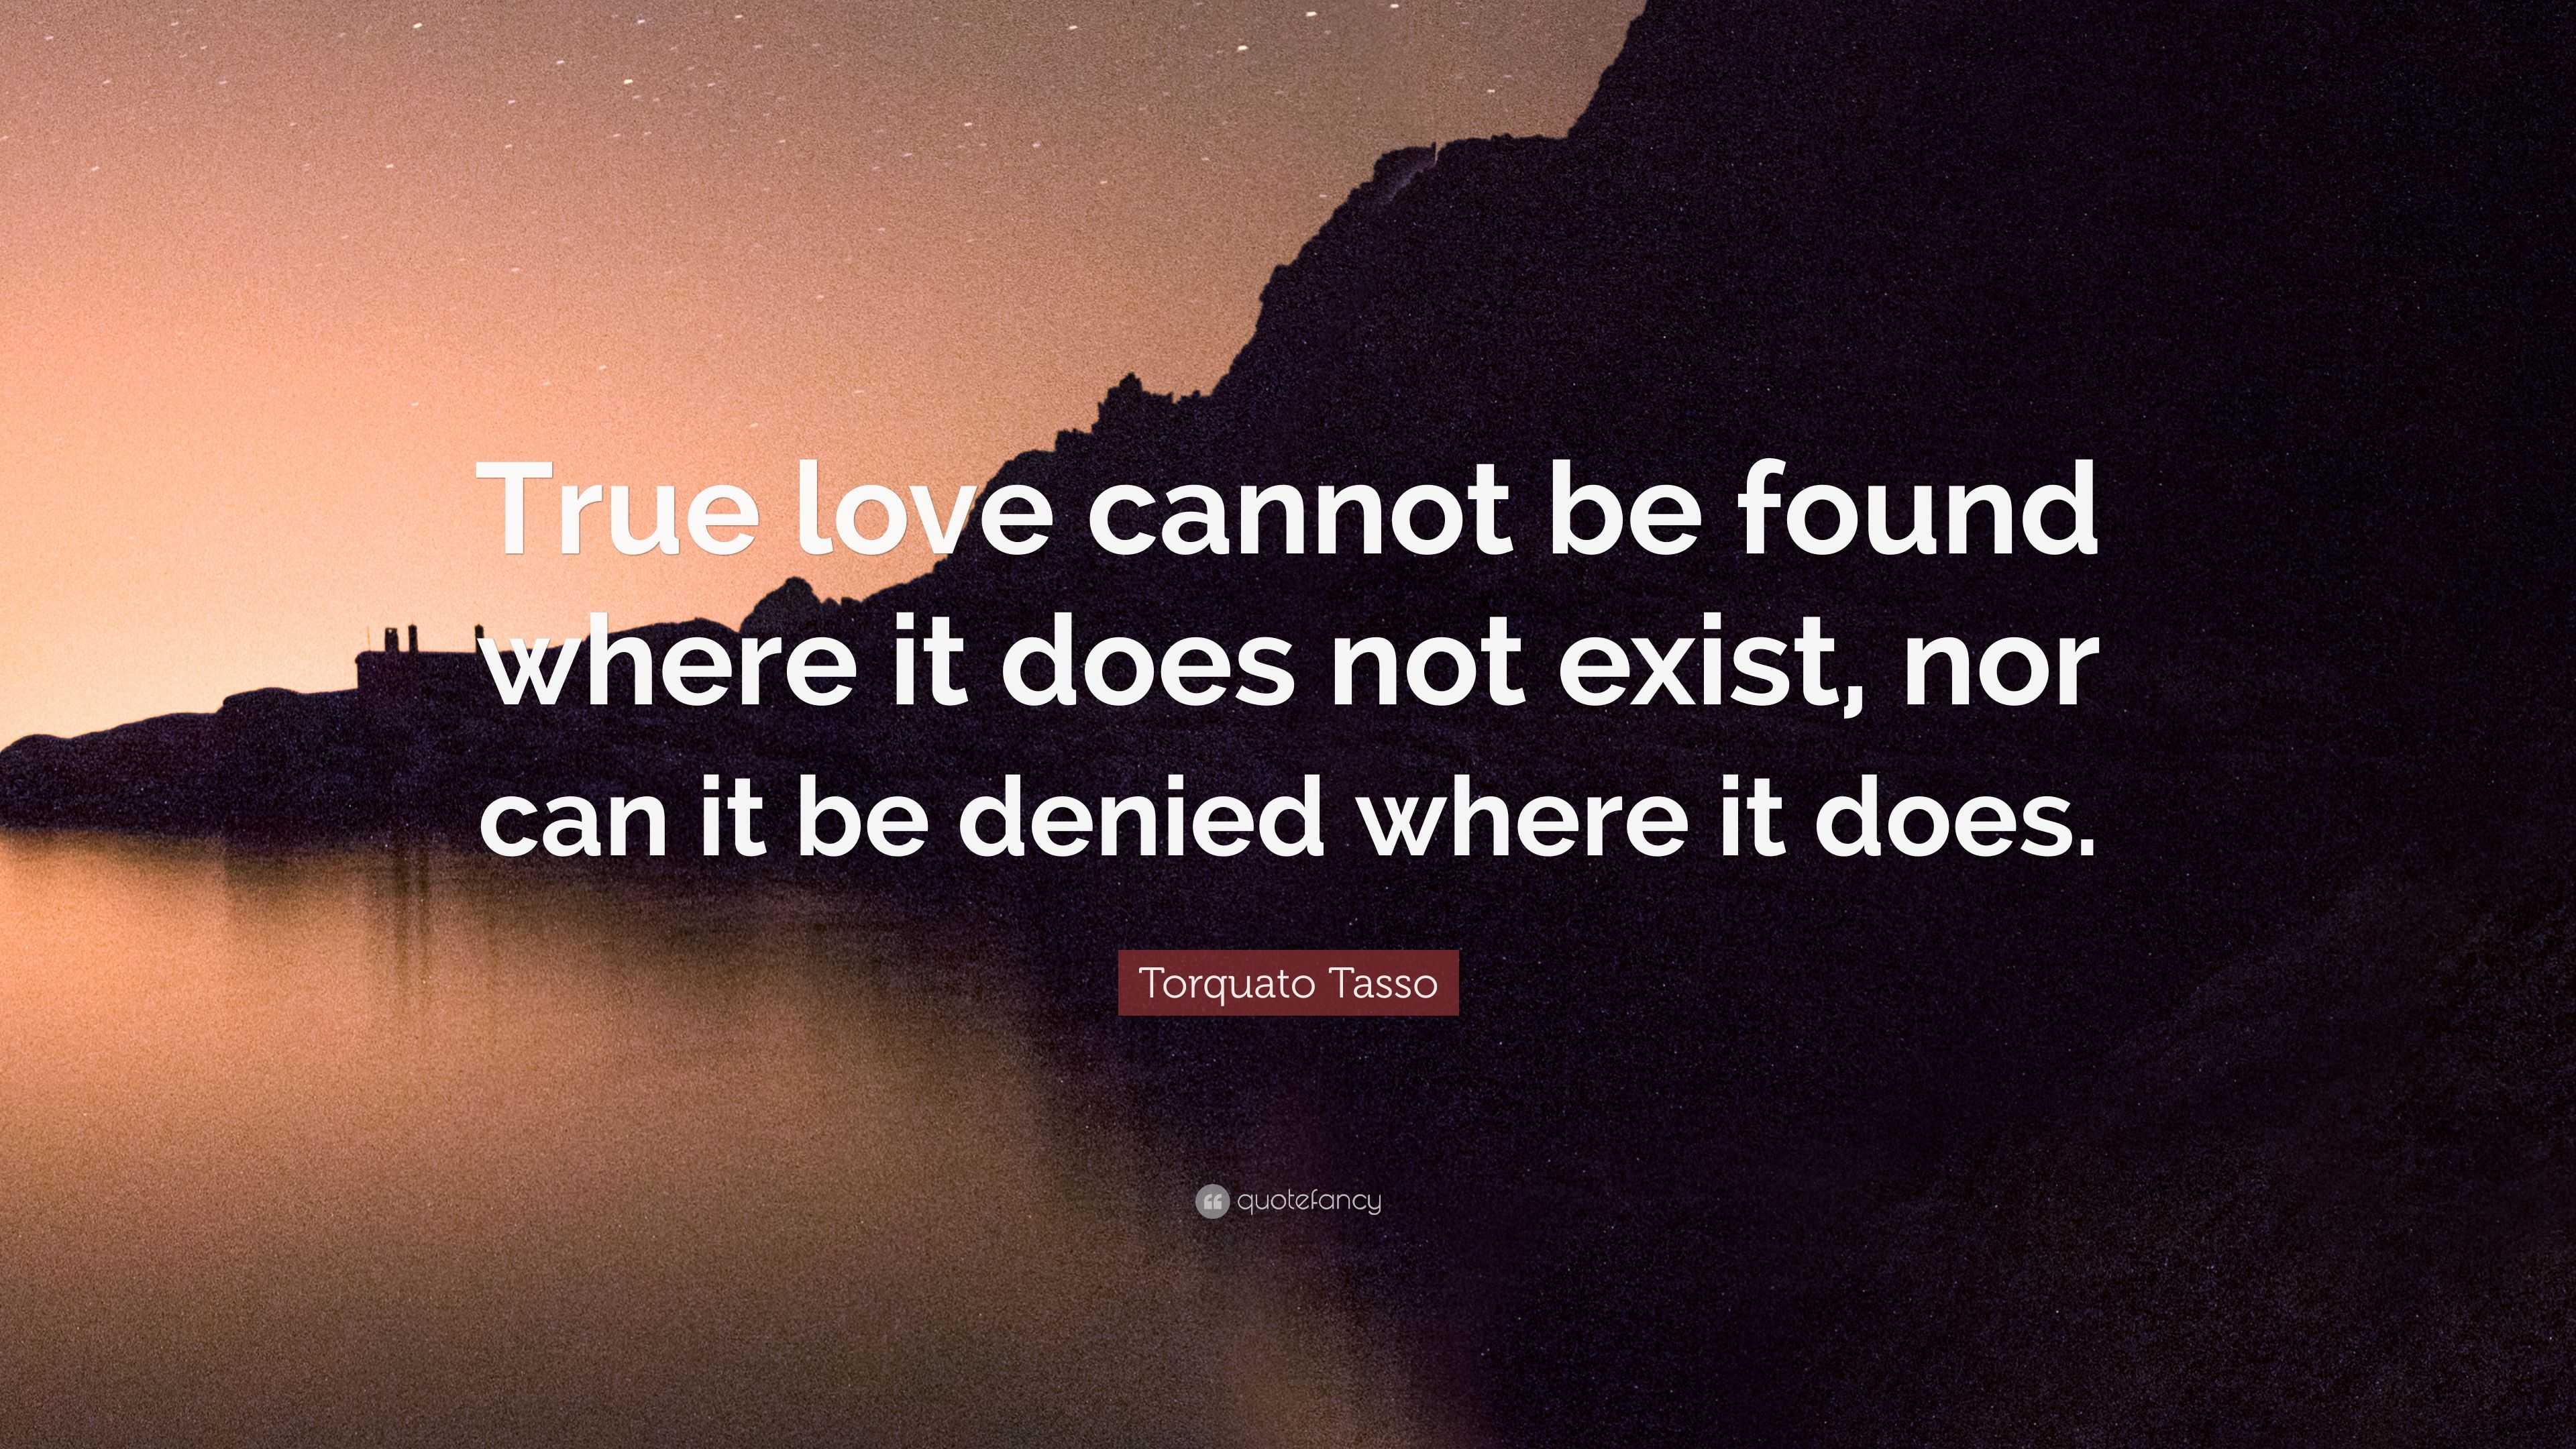 Torquato Tasso Quote “True love cannot be found where it does not exist